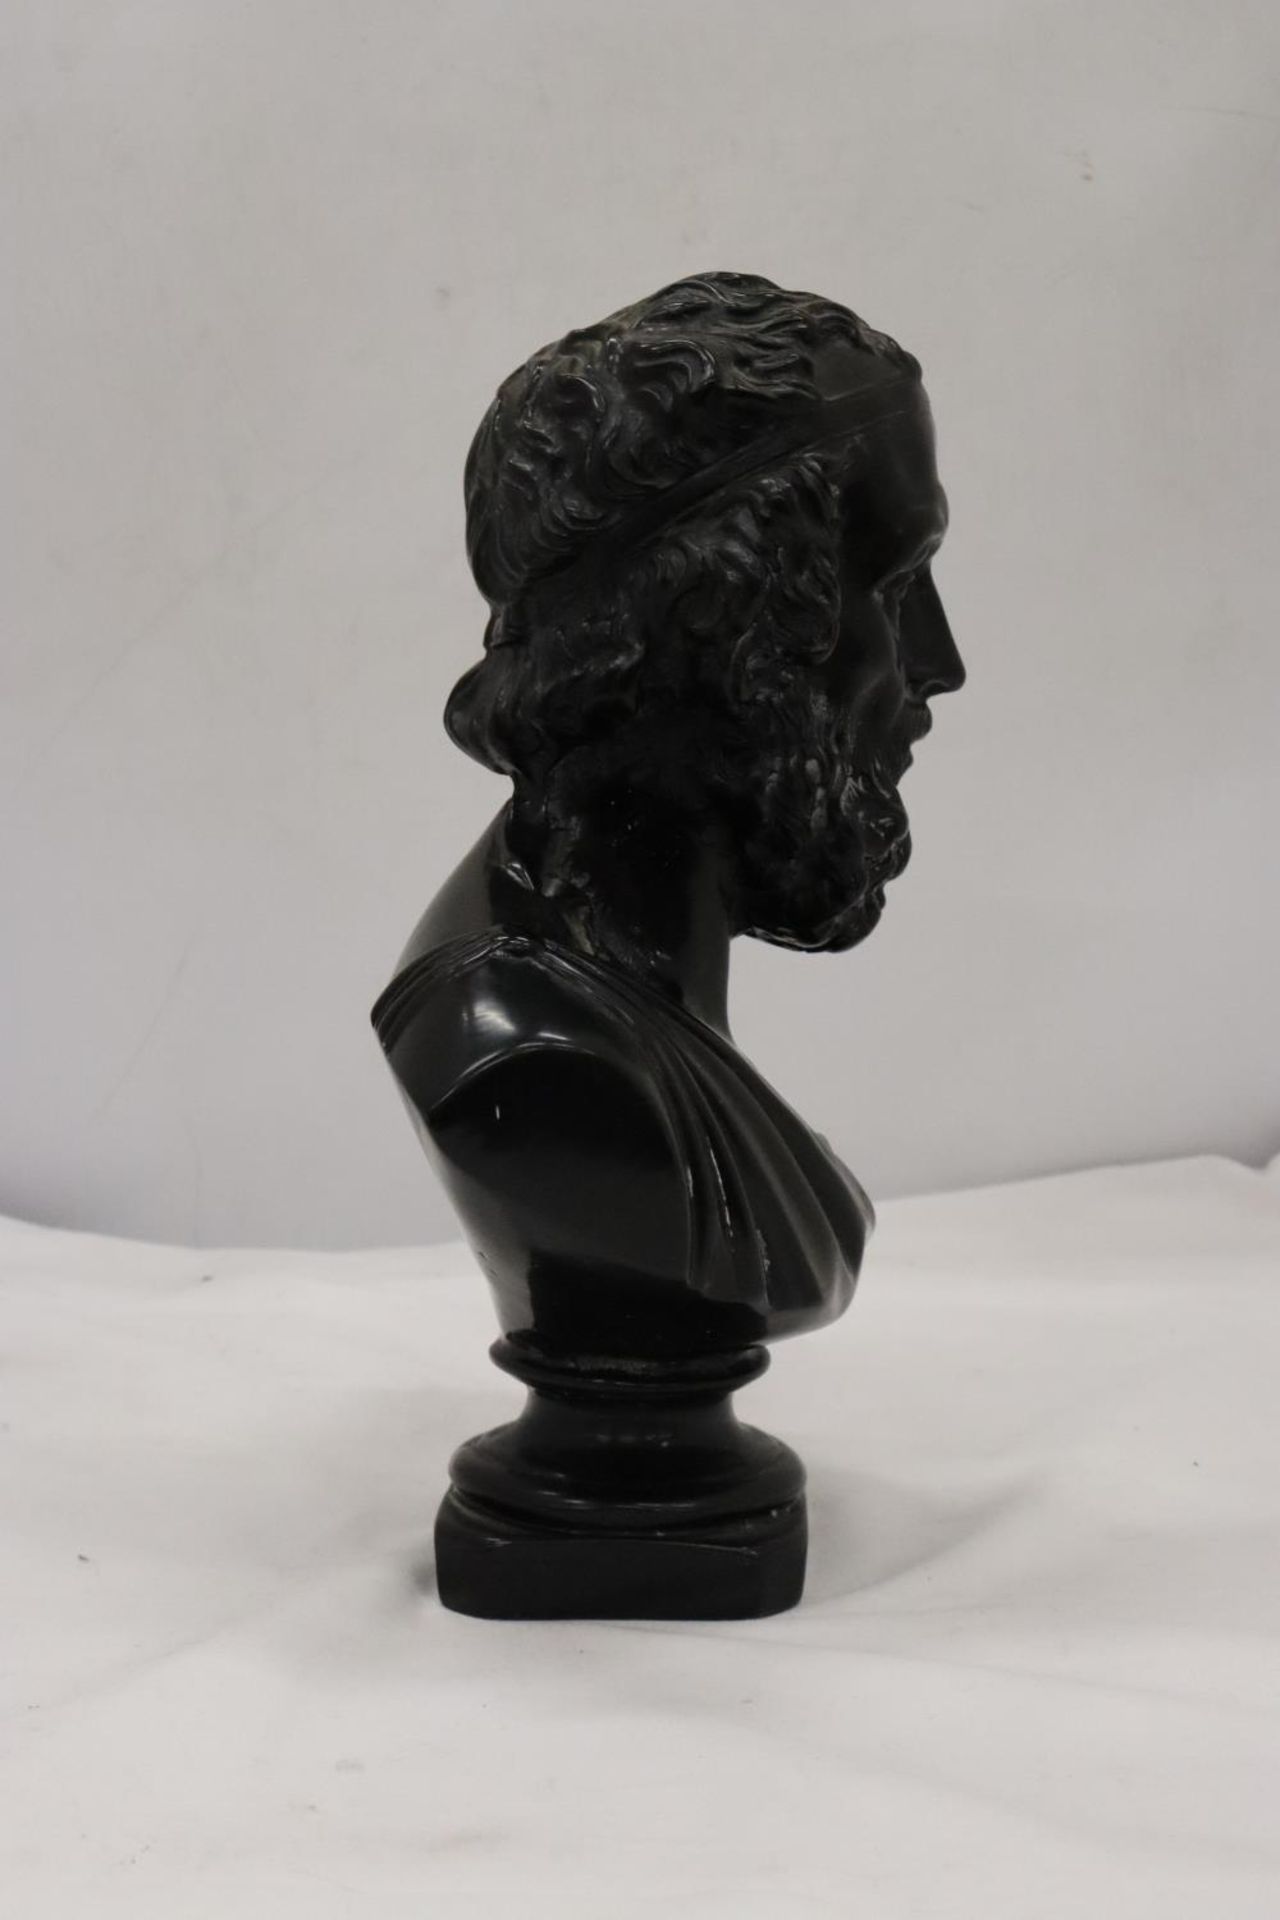 A HEAVY RESIN BUST OF CLASSICAL GREEK POET TITLED - 'HOMERE', HEIGHT 30 CM - Image 4 of 4